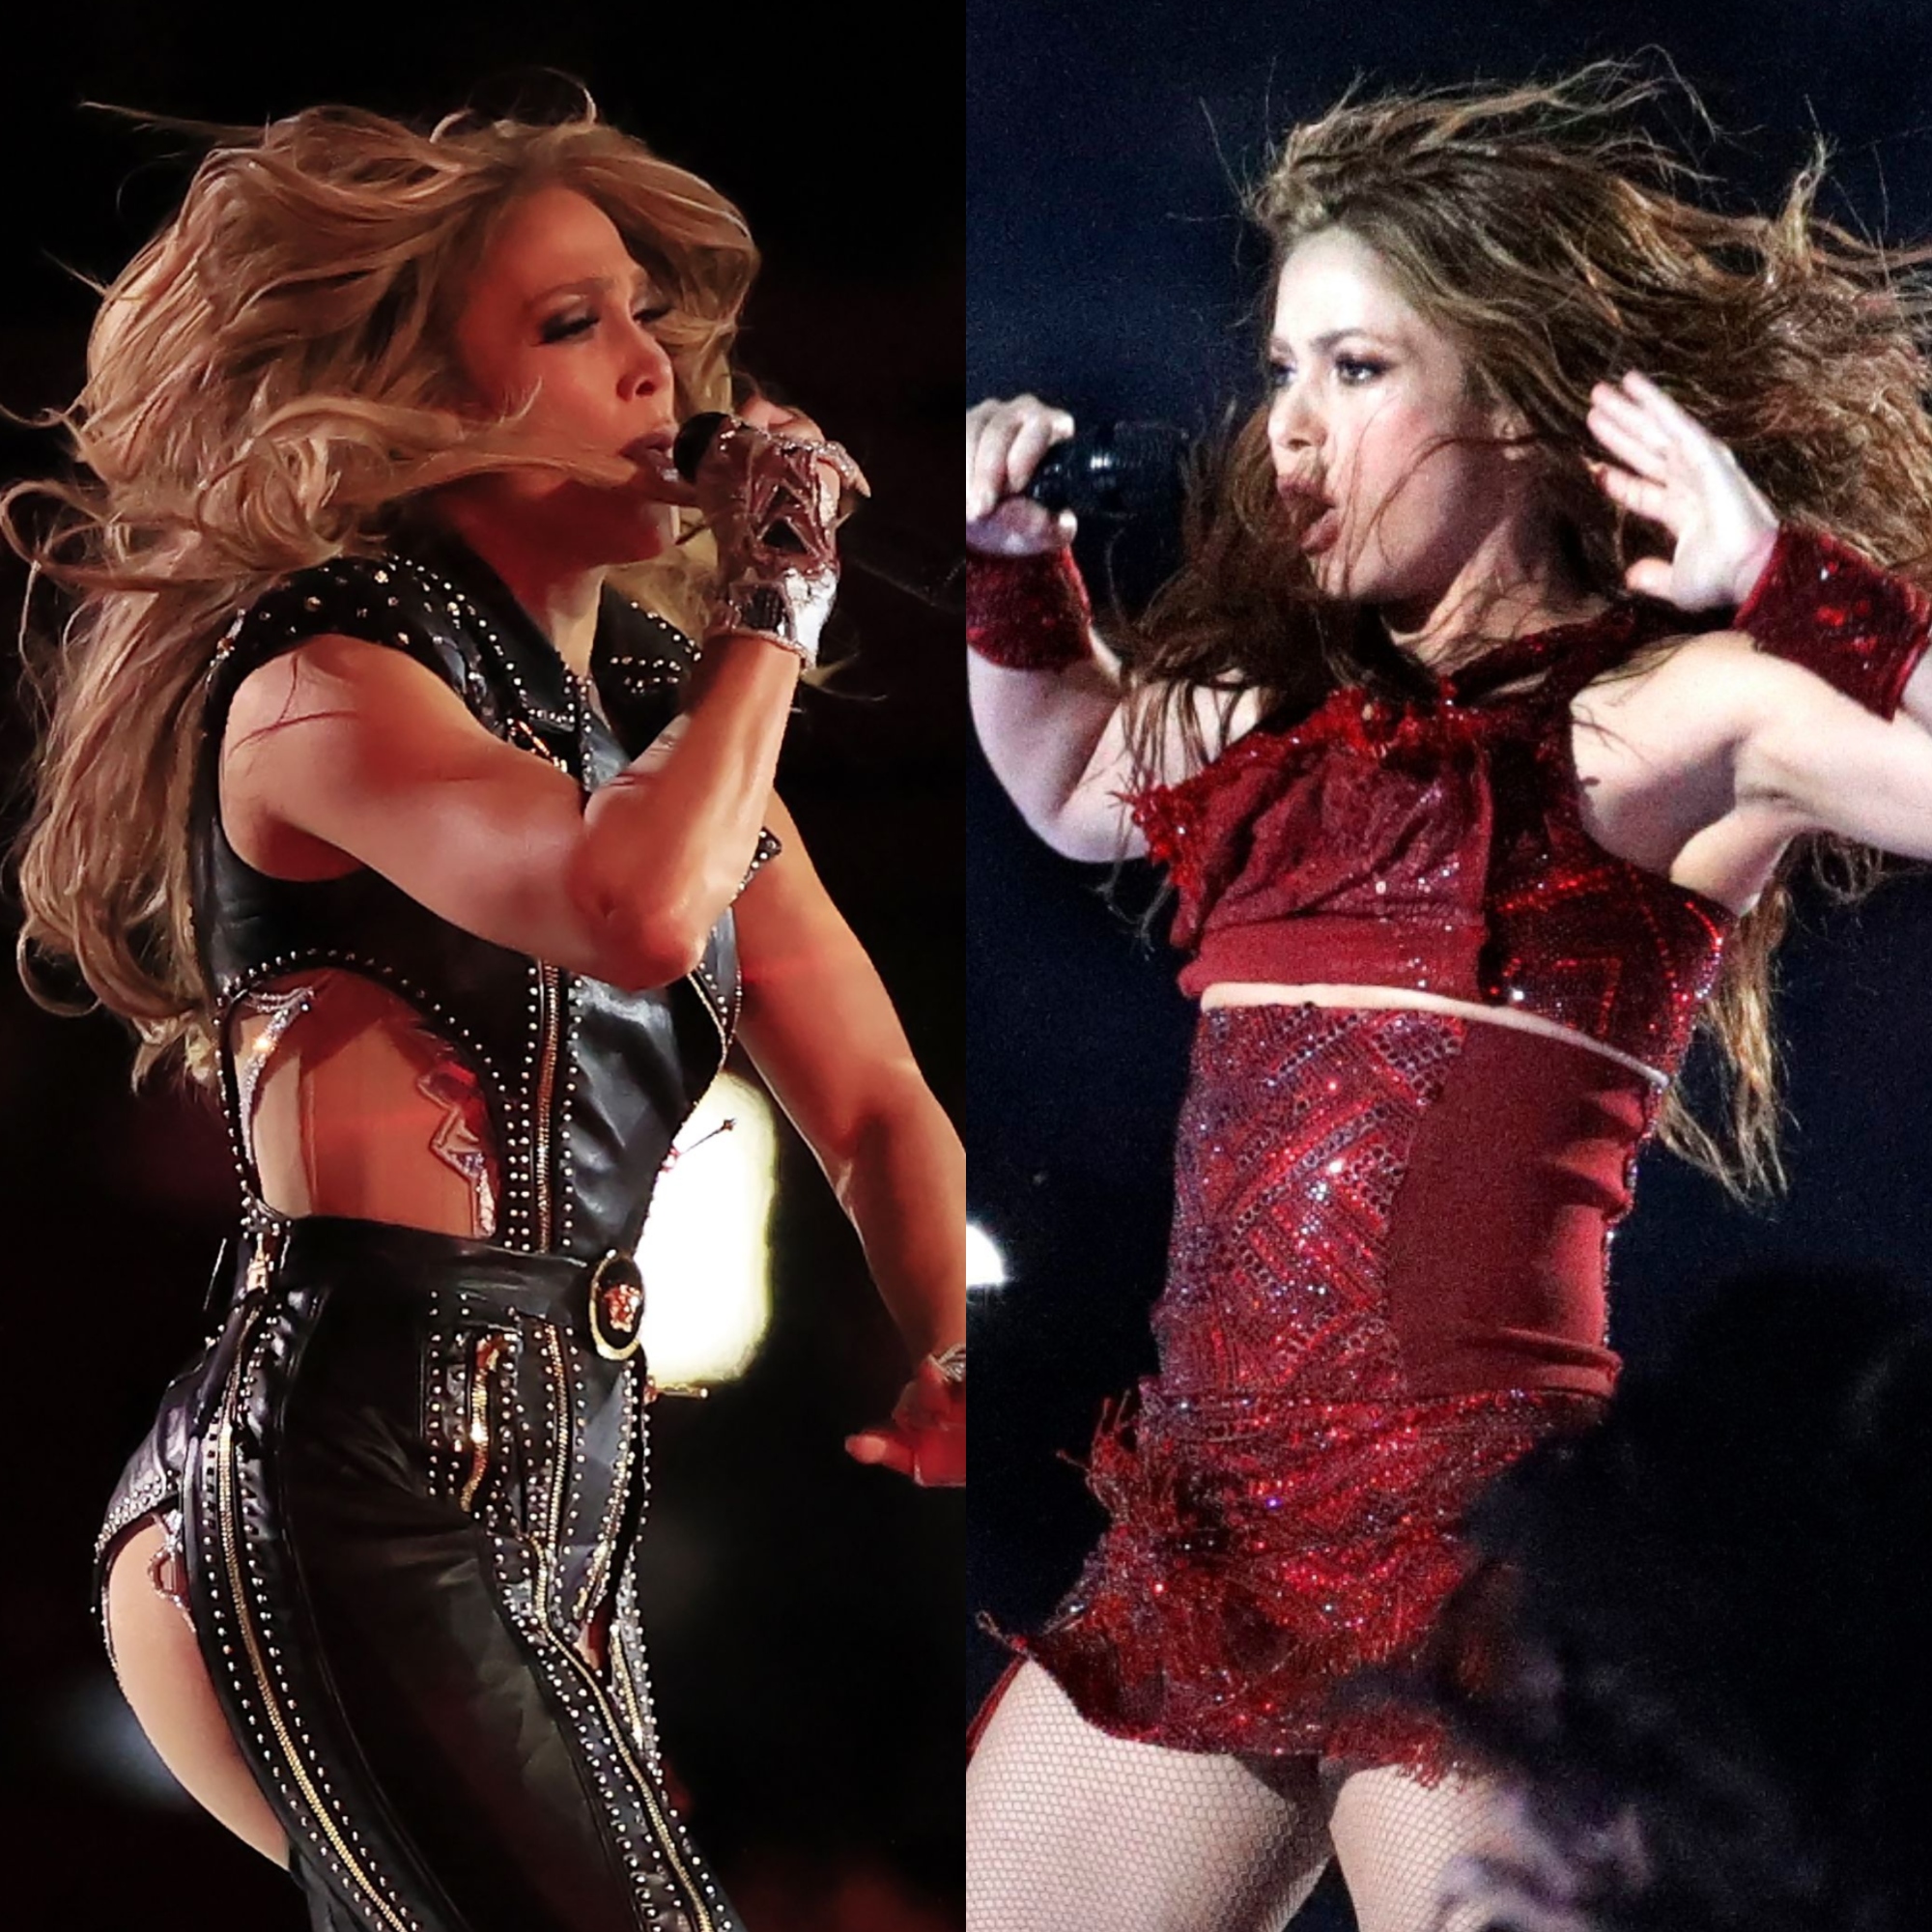 2020 Super Bowl Halftime Show Is J Lo And Shakira At Their Best